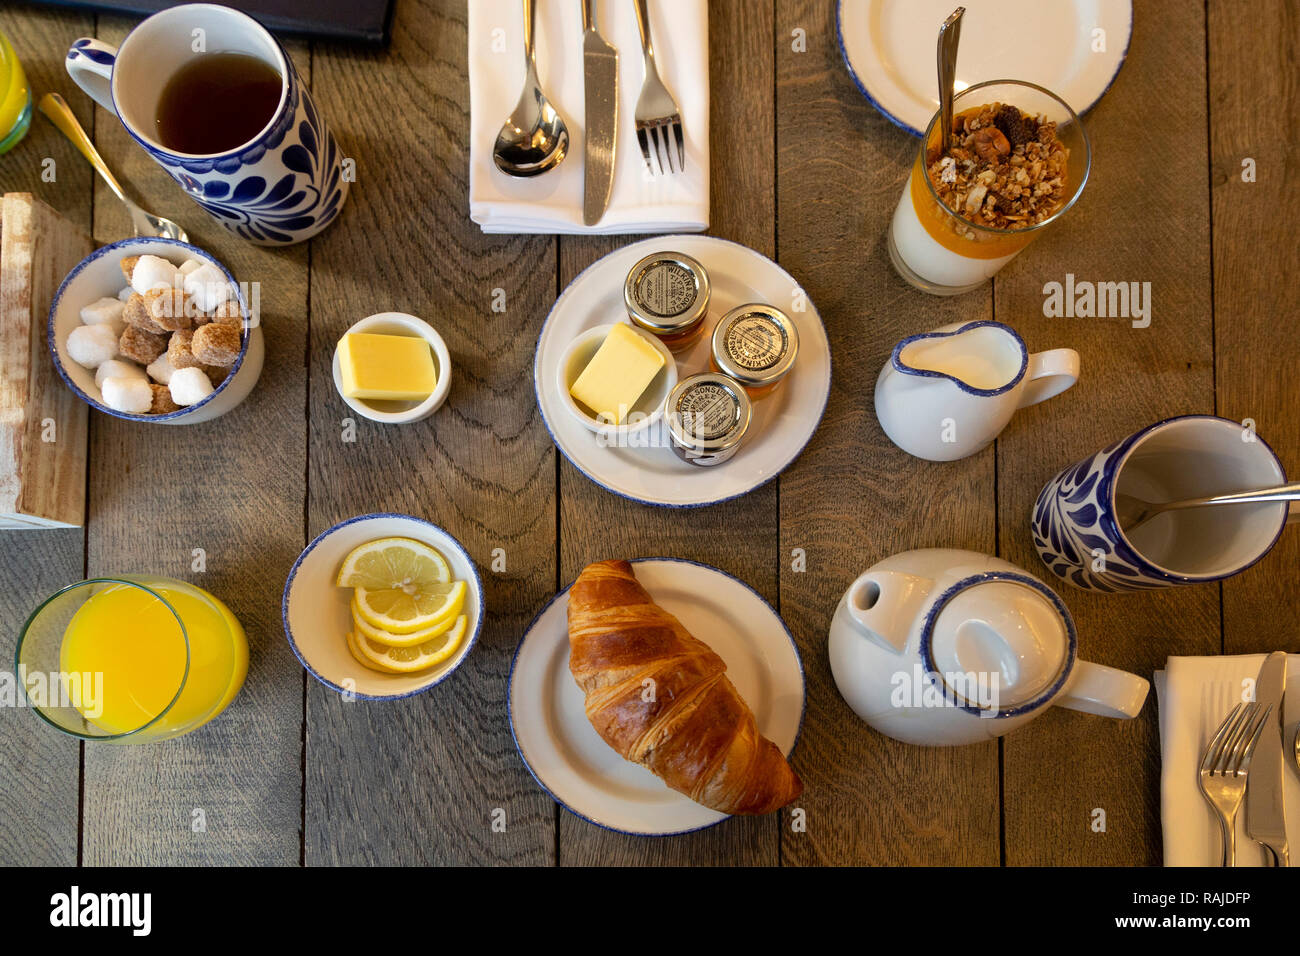 A breakfast table with a croissant, preserves and orange juice. Teacups also stand on the table. Stock Photo